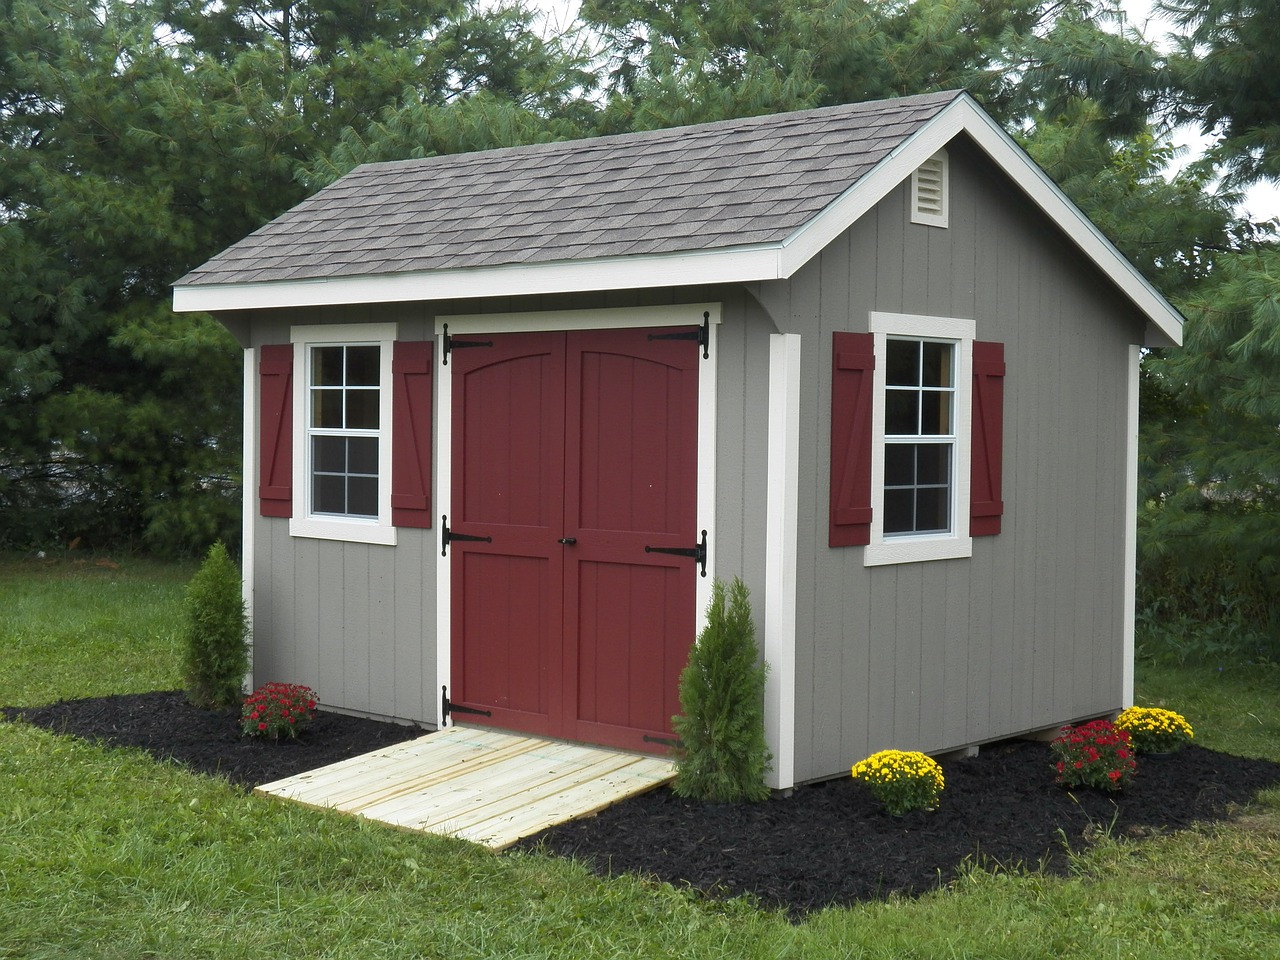 Simple garden shed with a blend of gray and dark red exterior